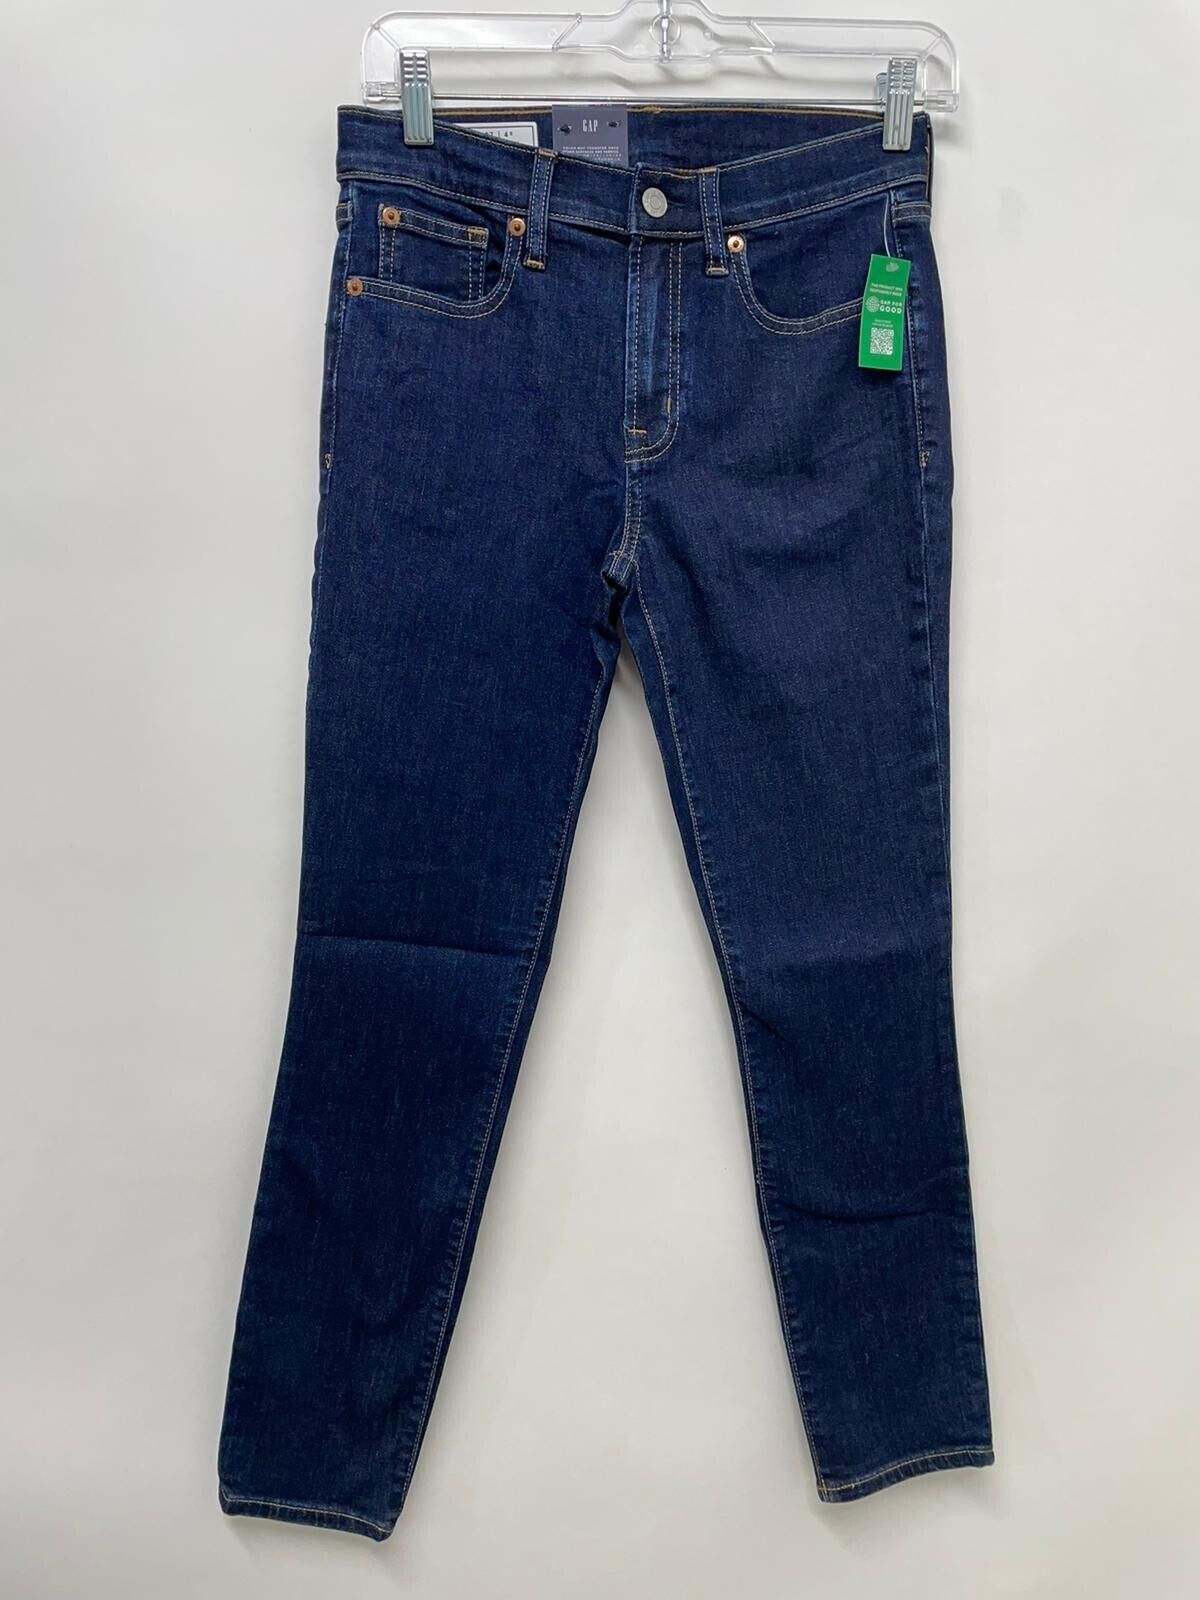 Gap Womens 27S 4P Mid Rise True Skinny Jeans With Washwell Rinses Dark Wash